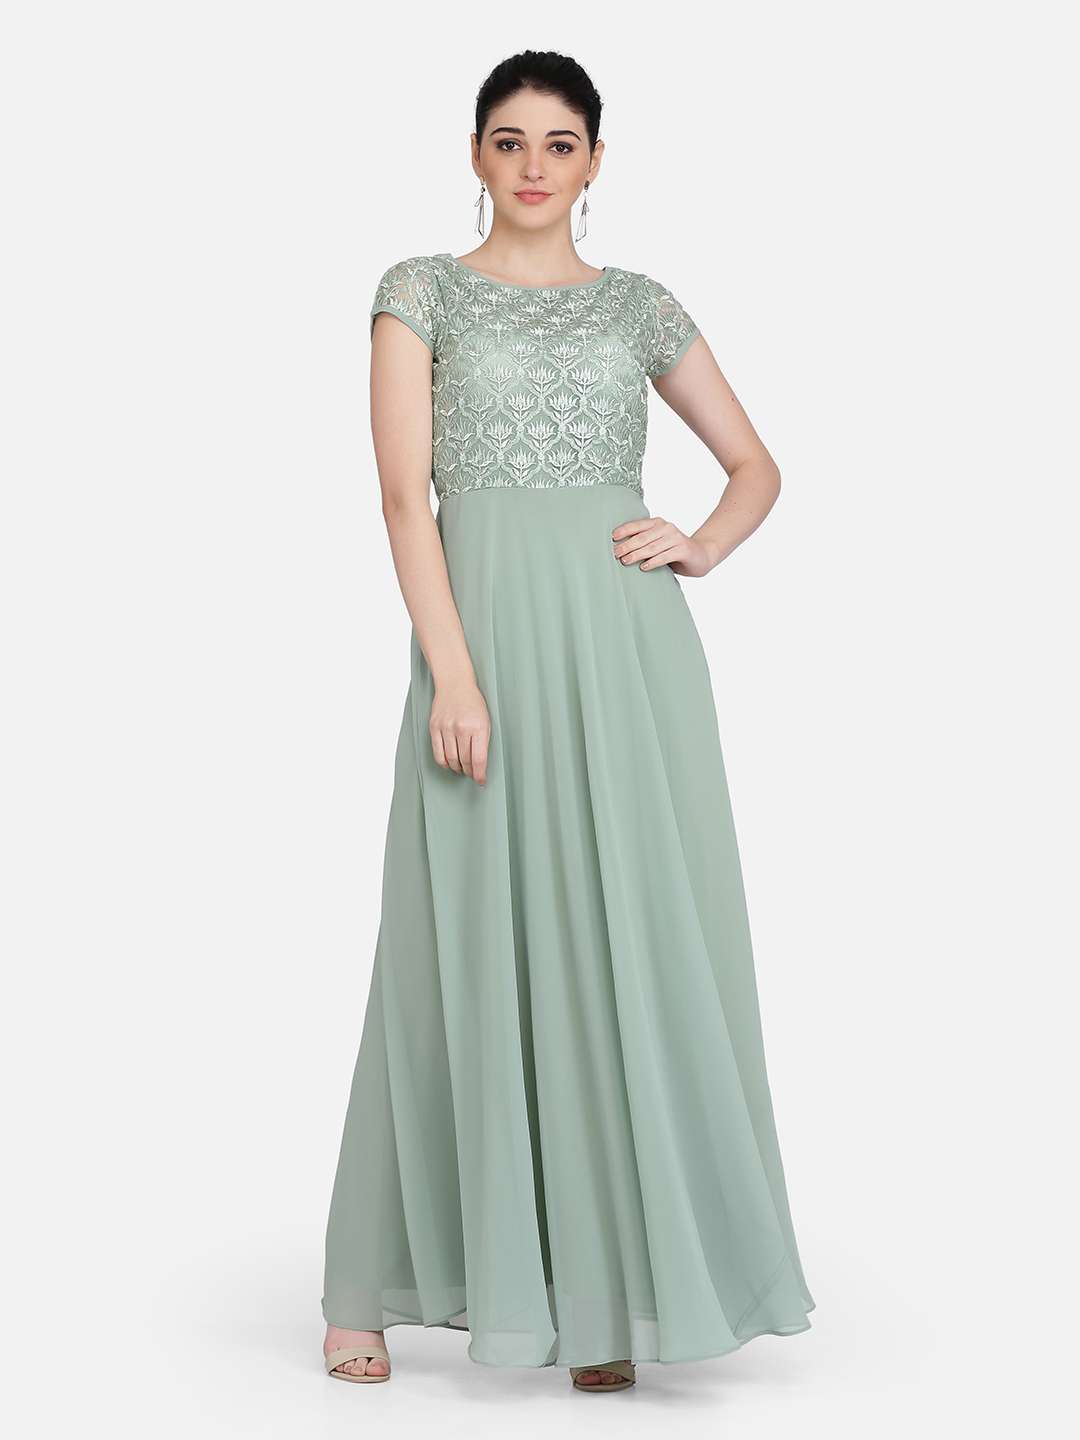 Where to Buy Your Evening Gown in 2022 #separator_sa #site_title